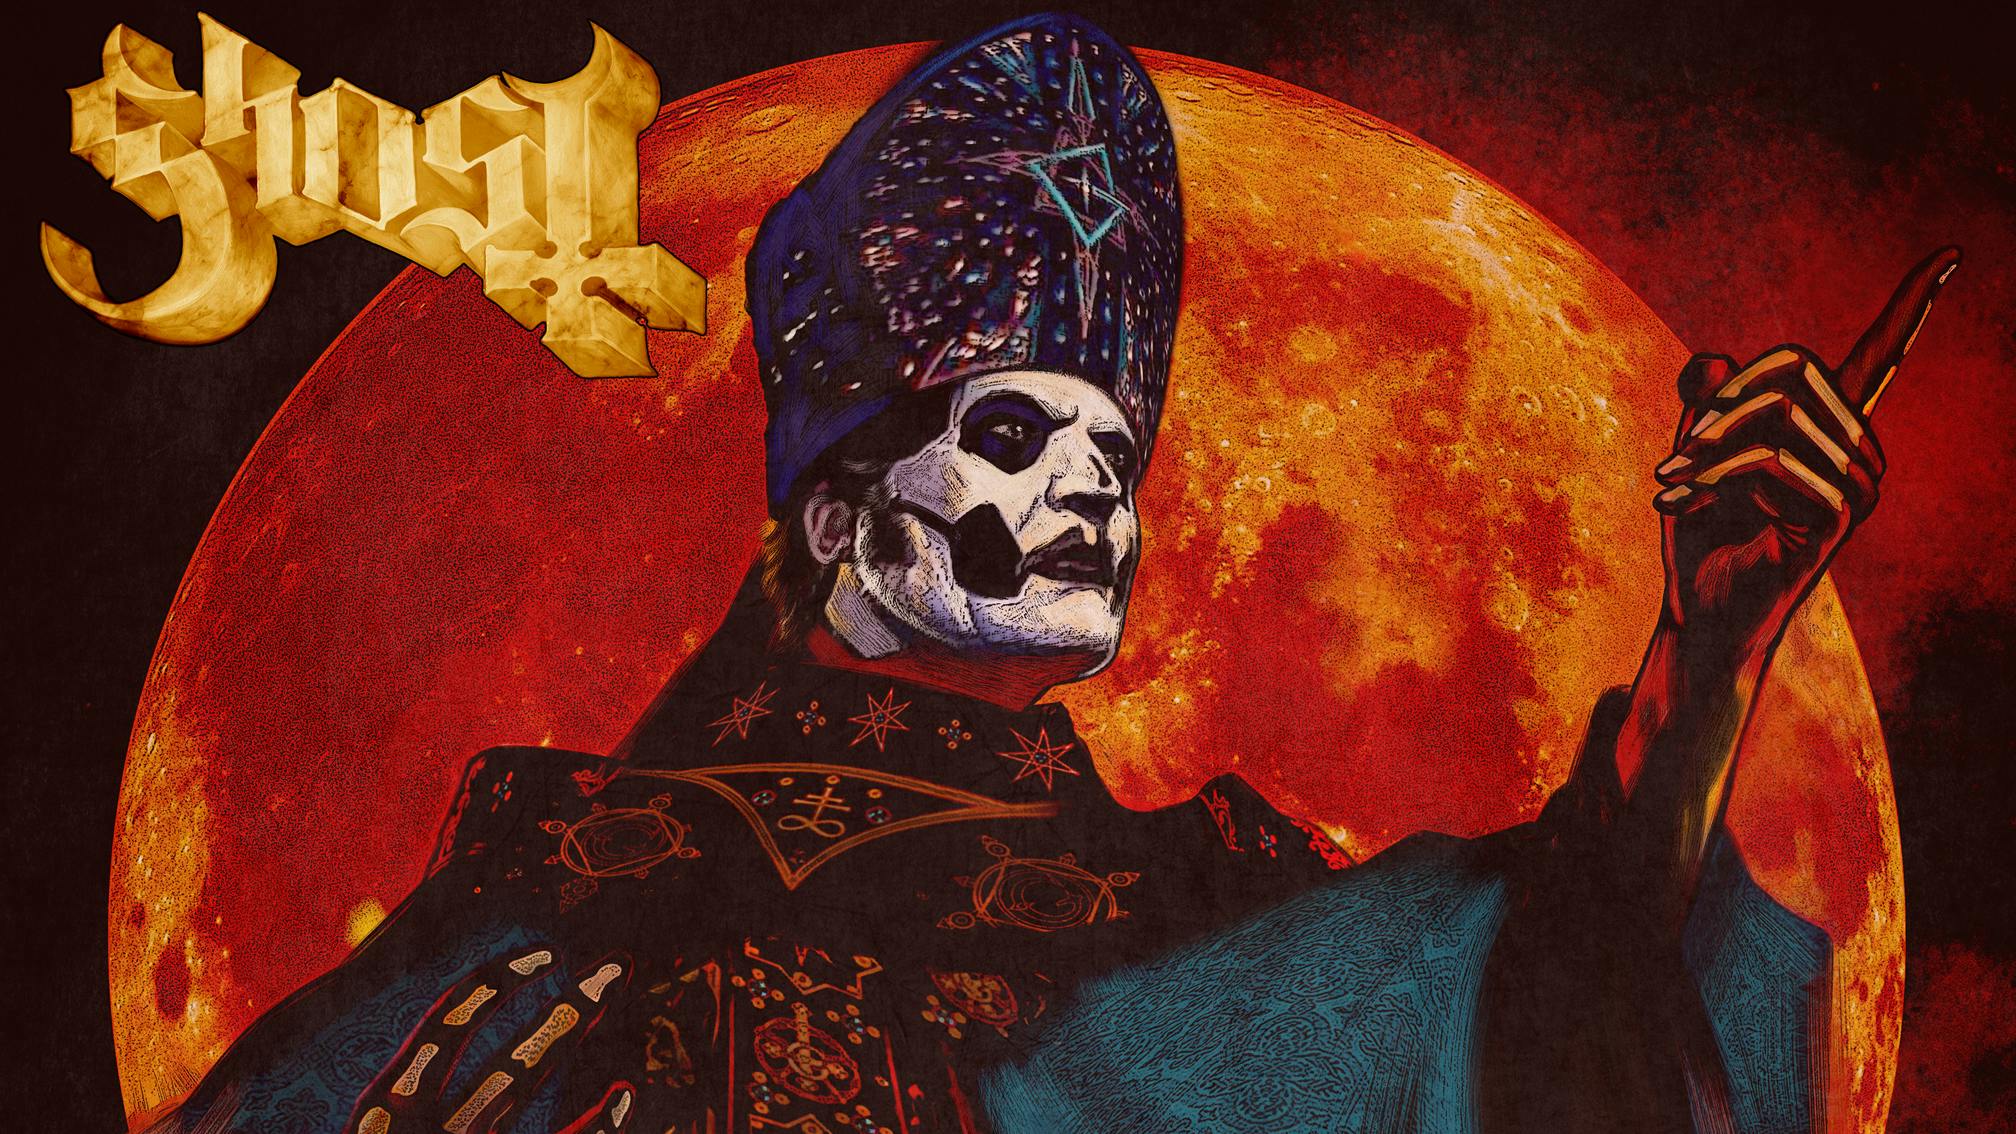 Ghost have released a spooky video for new song Hunter's Moon